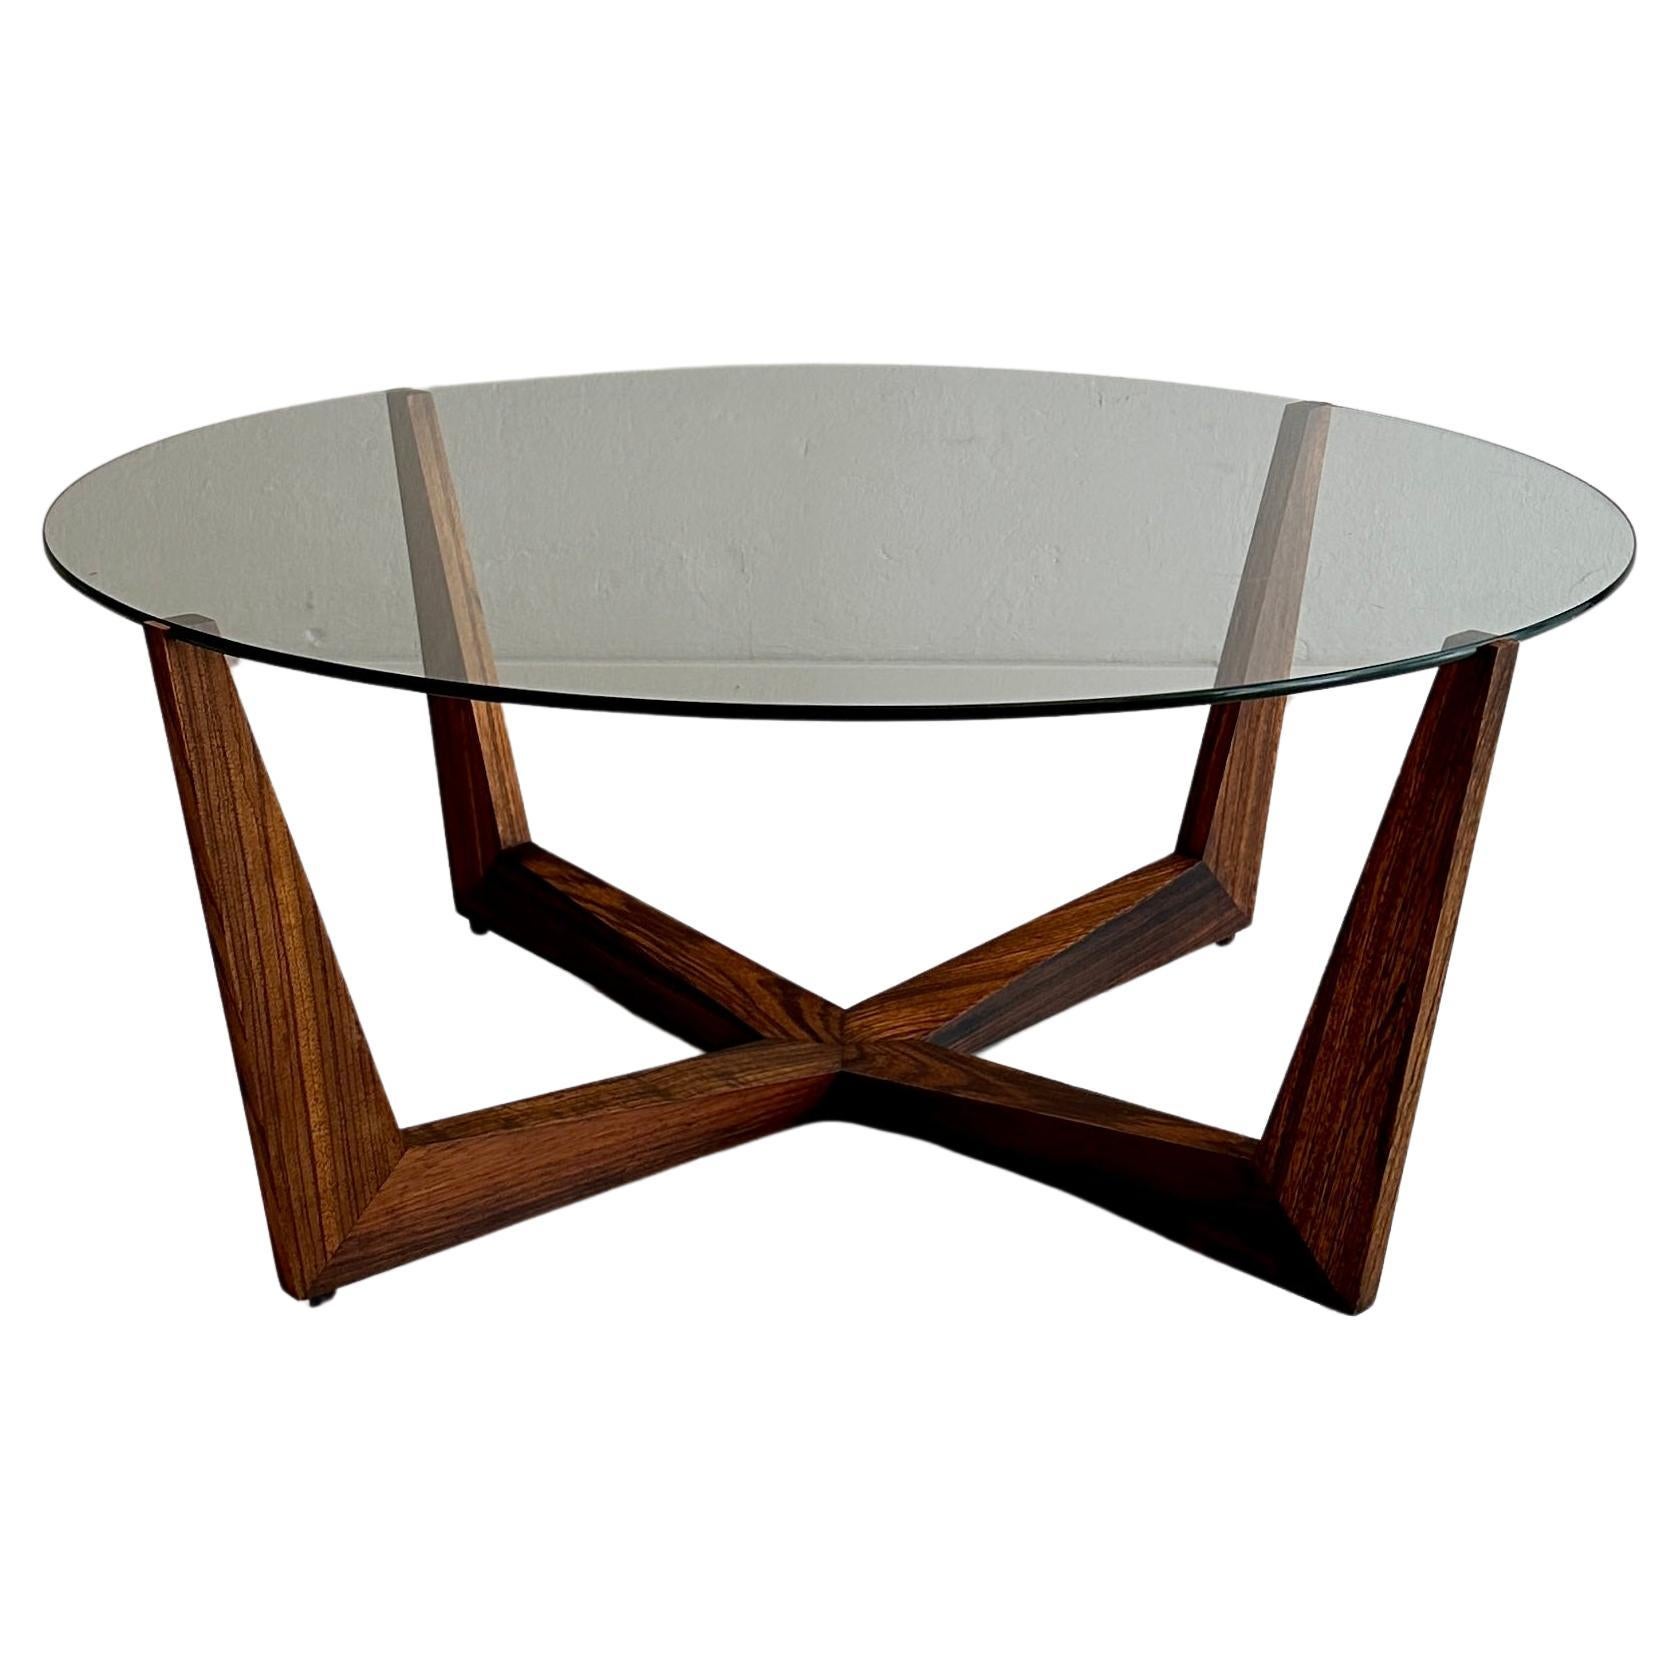 Round Coffee Table by Wilhelm Renz in Teak and Glass, around 1960